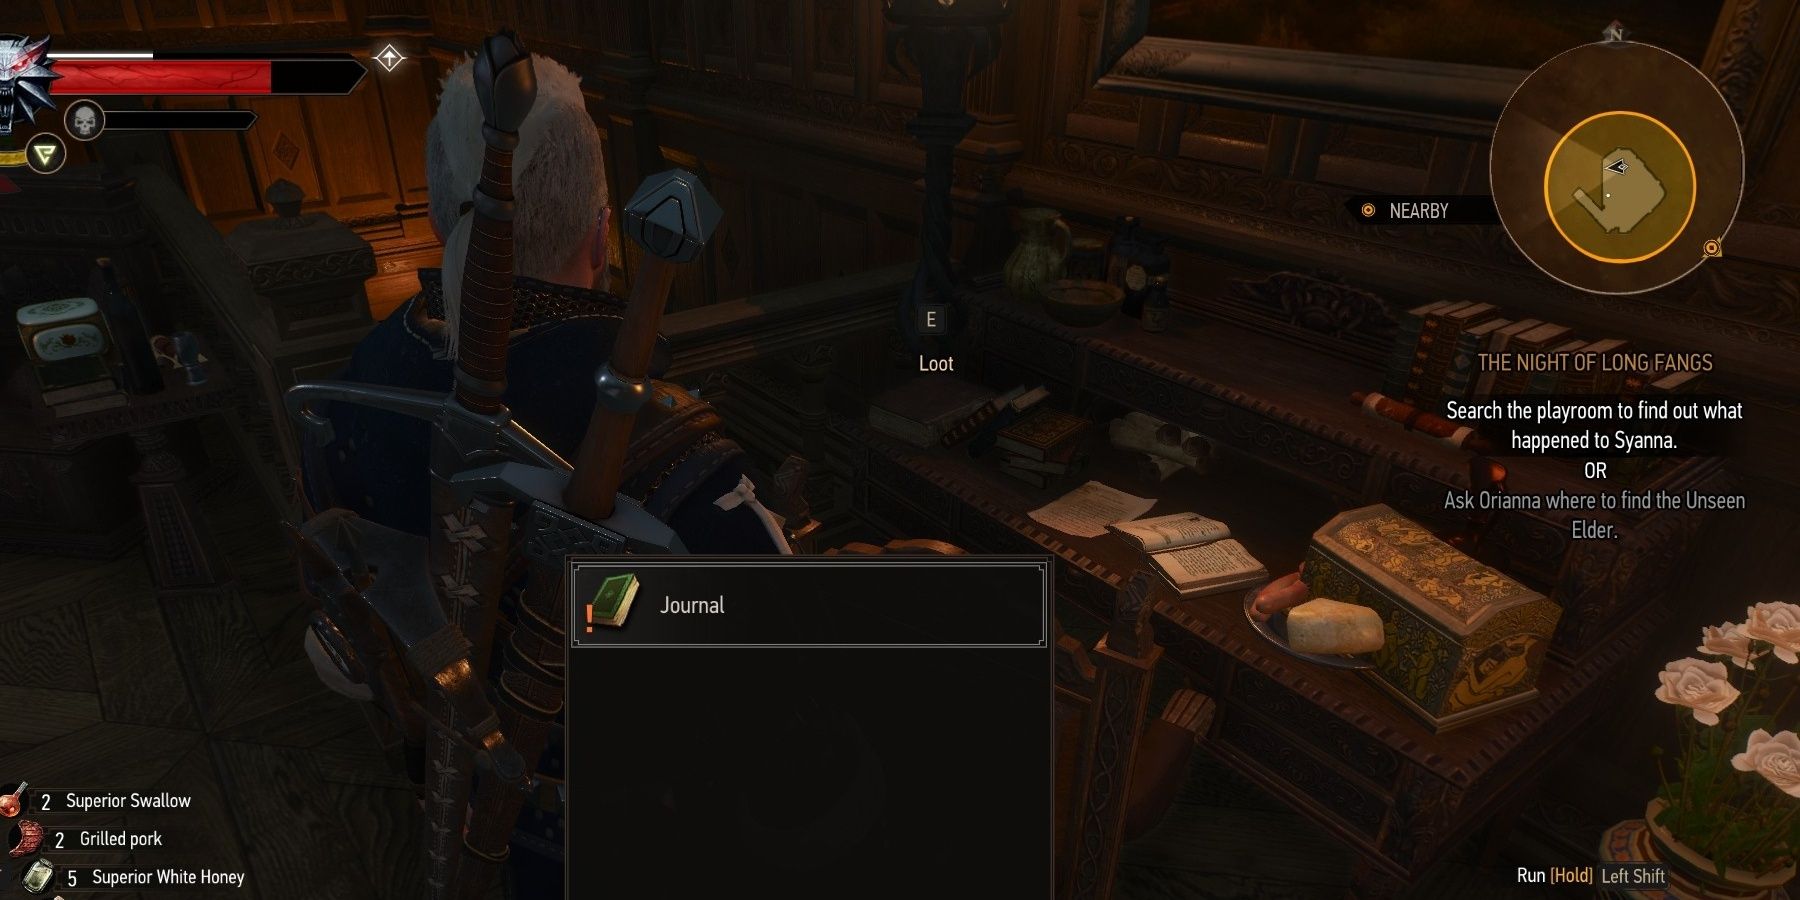 Playroom with the Journals selected in the loot menu in the Witcher 3